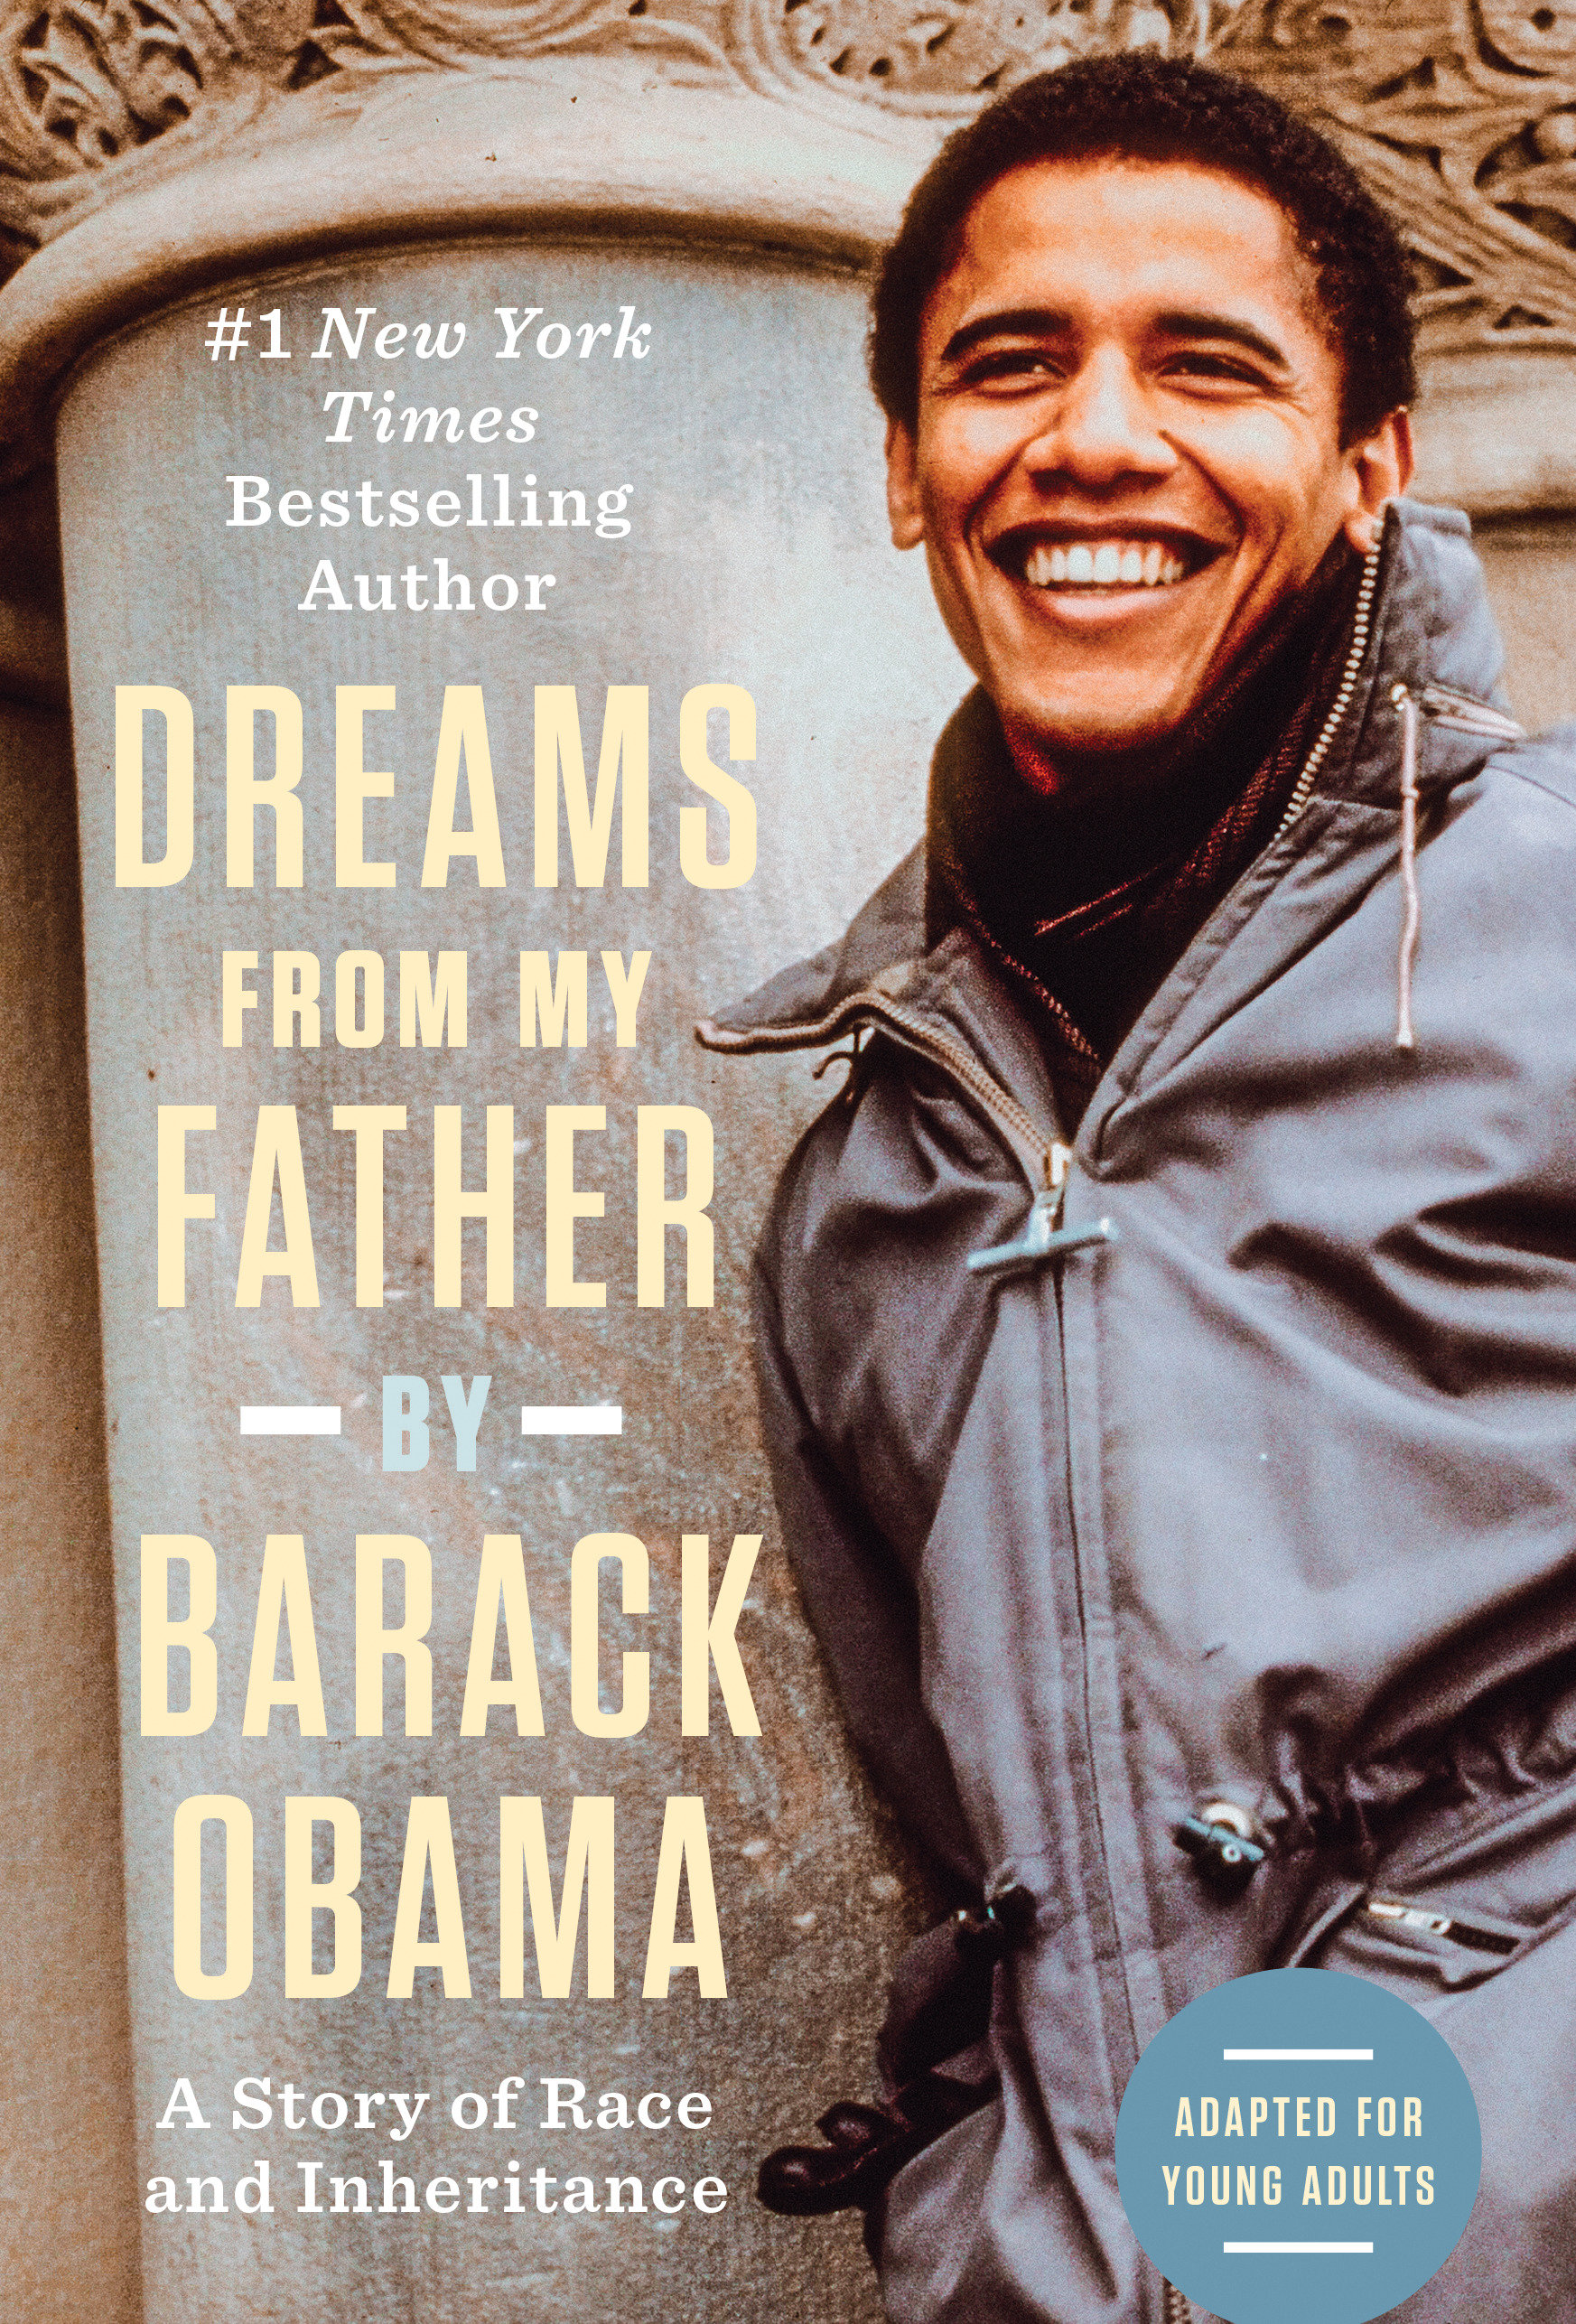 Dreams from My Father (Adapted for Young Adults) A Story of Race and Inheritance